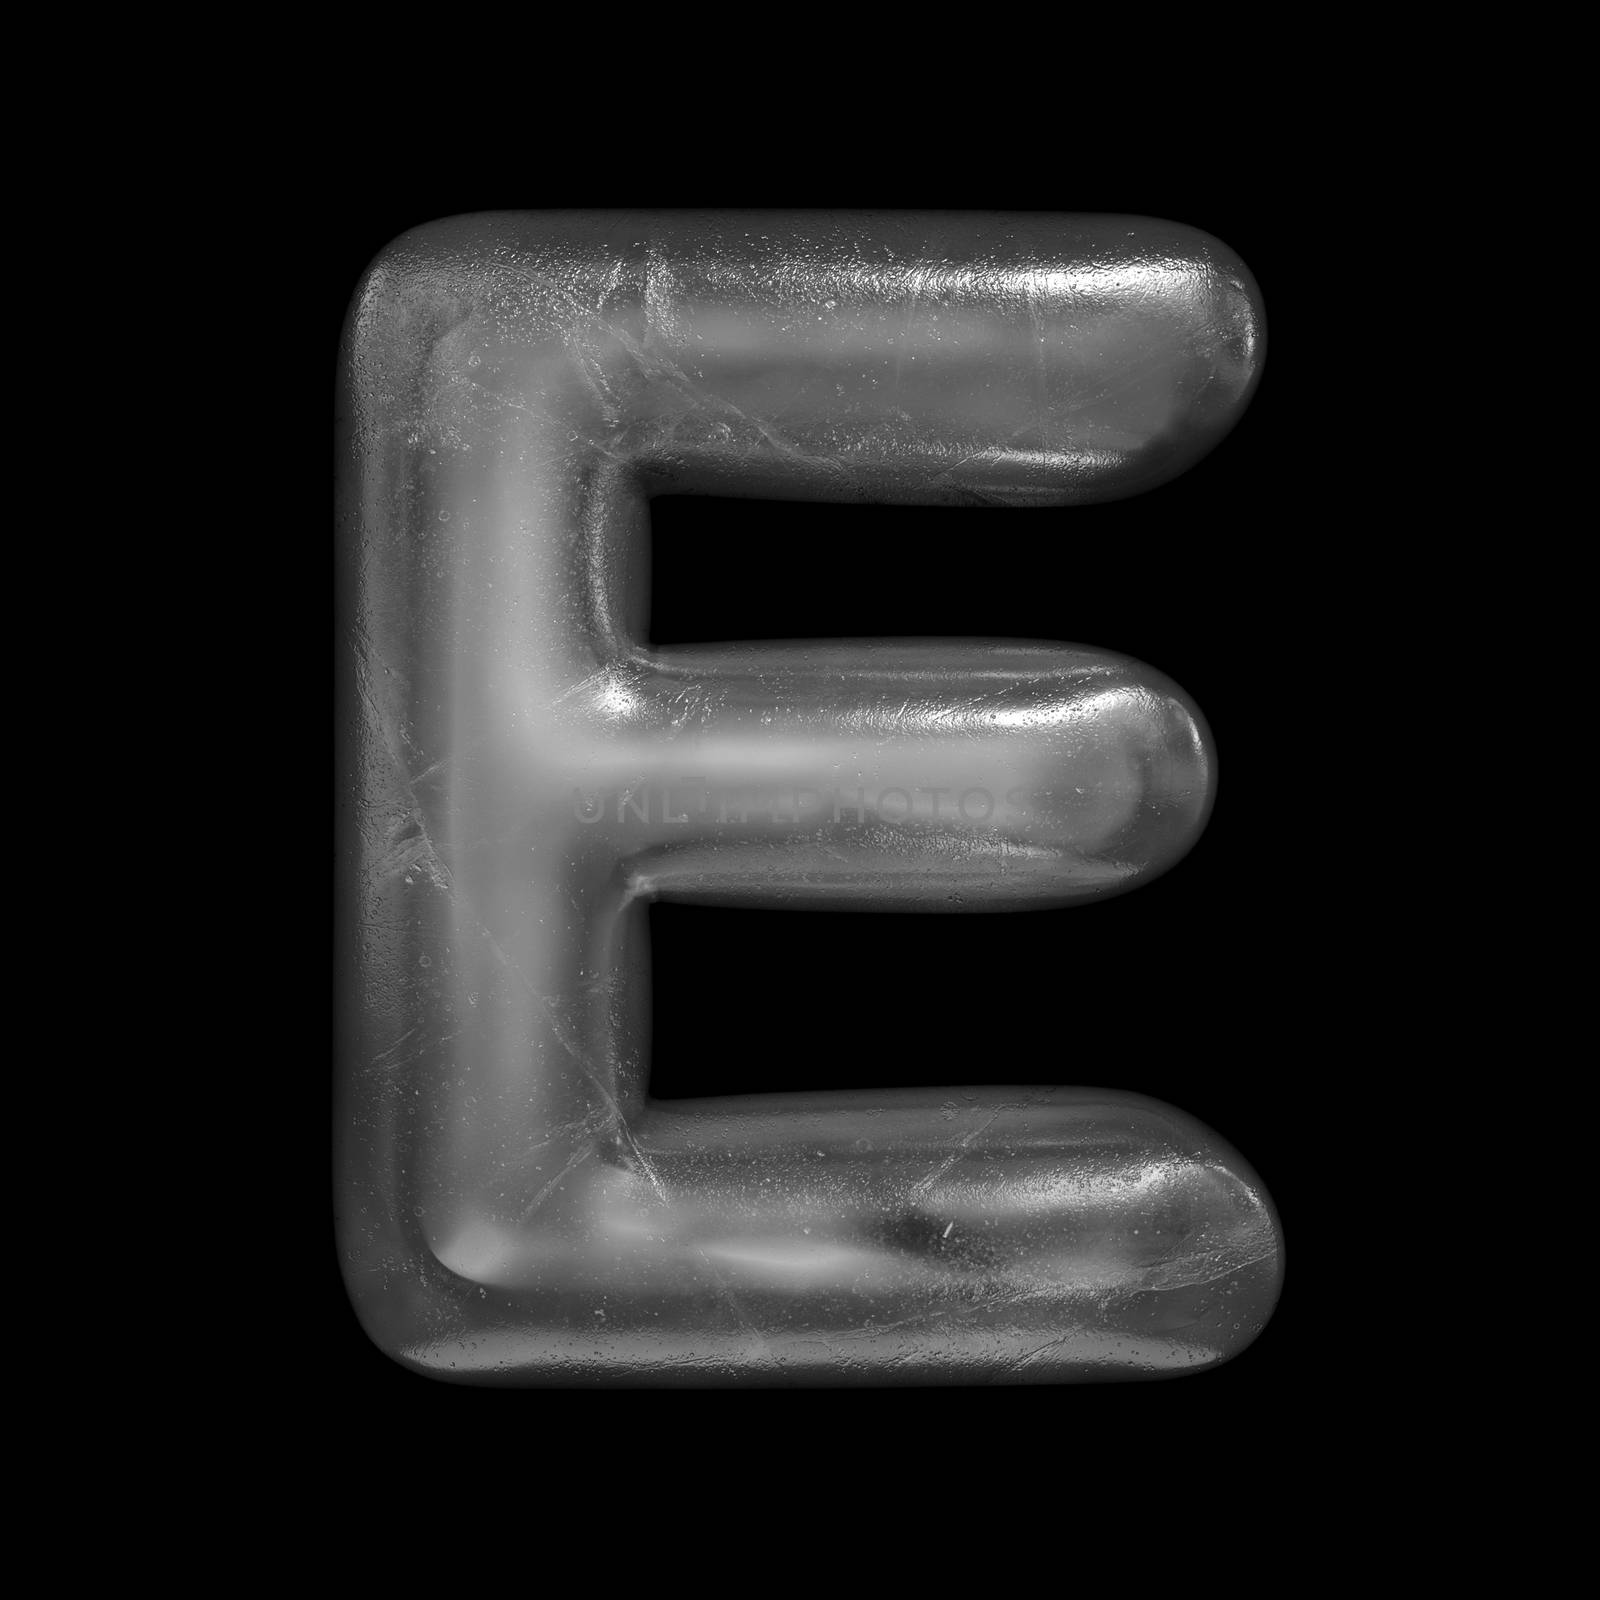 Ice letter E - large 3d Winter font isolated on black background. This alphabet is perfect for creative illustrations related but not limited to Nature, Winter, Christmas...